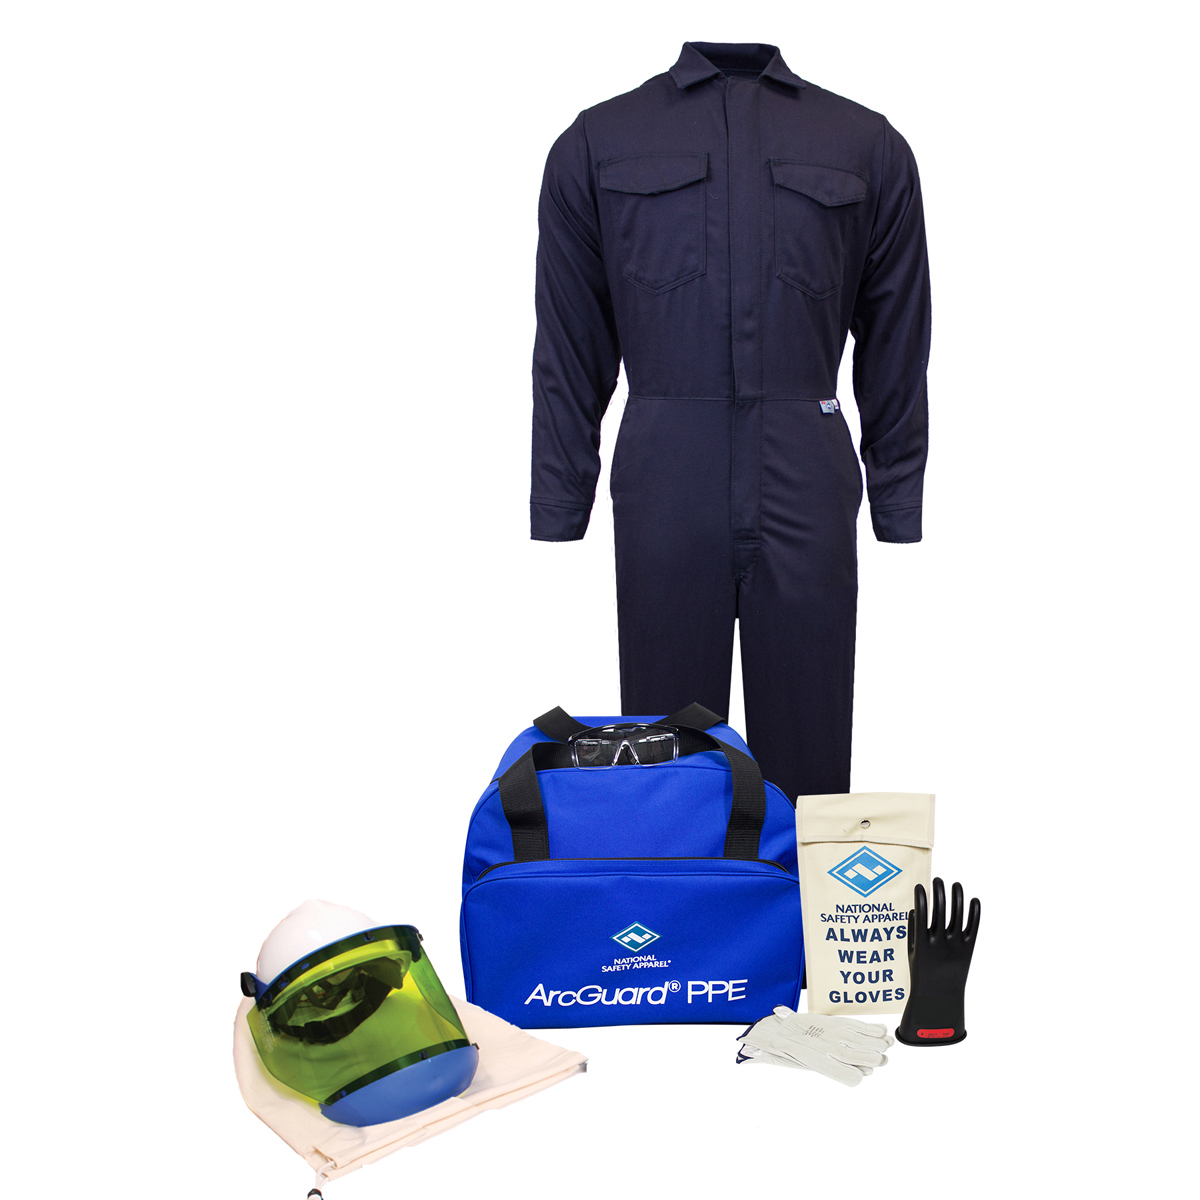 National Safety Apparel 3X Navy Westex UltraSoft® ArcGuard® Flame Resistant Arc Flash Personal Protective Equipment Kit With Siz